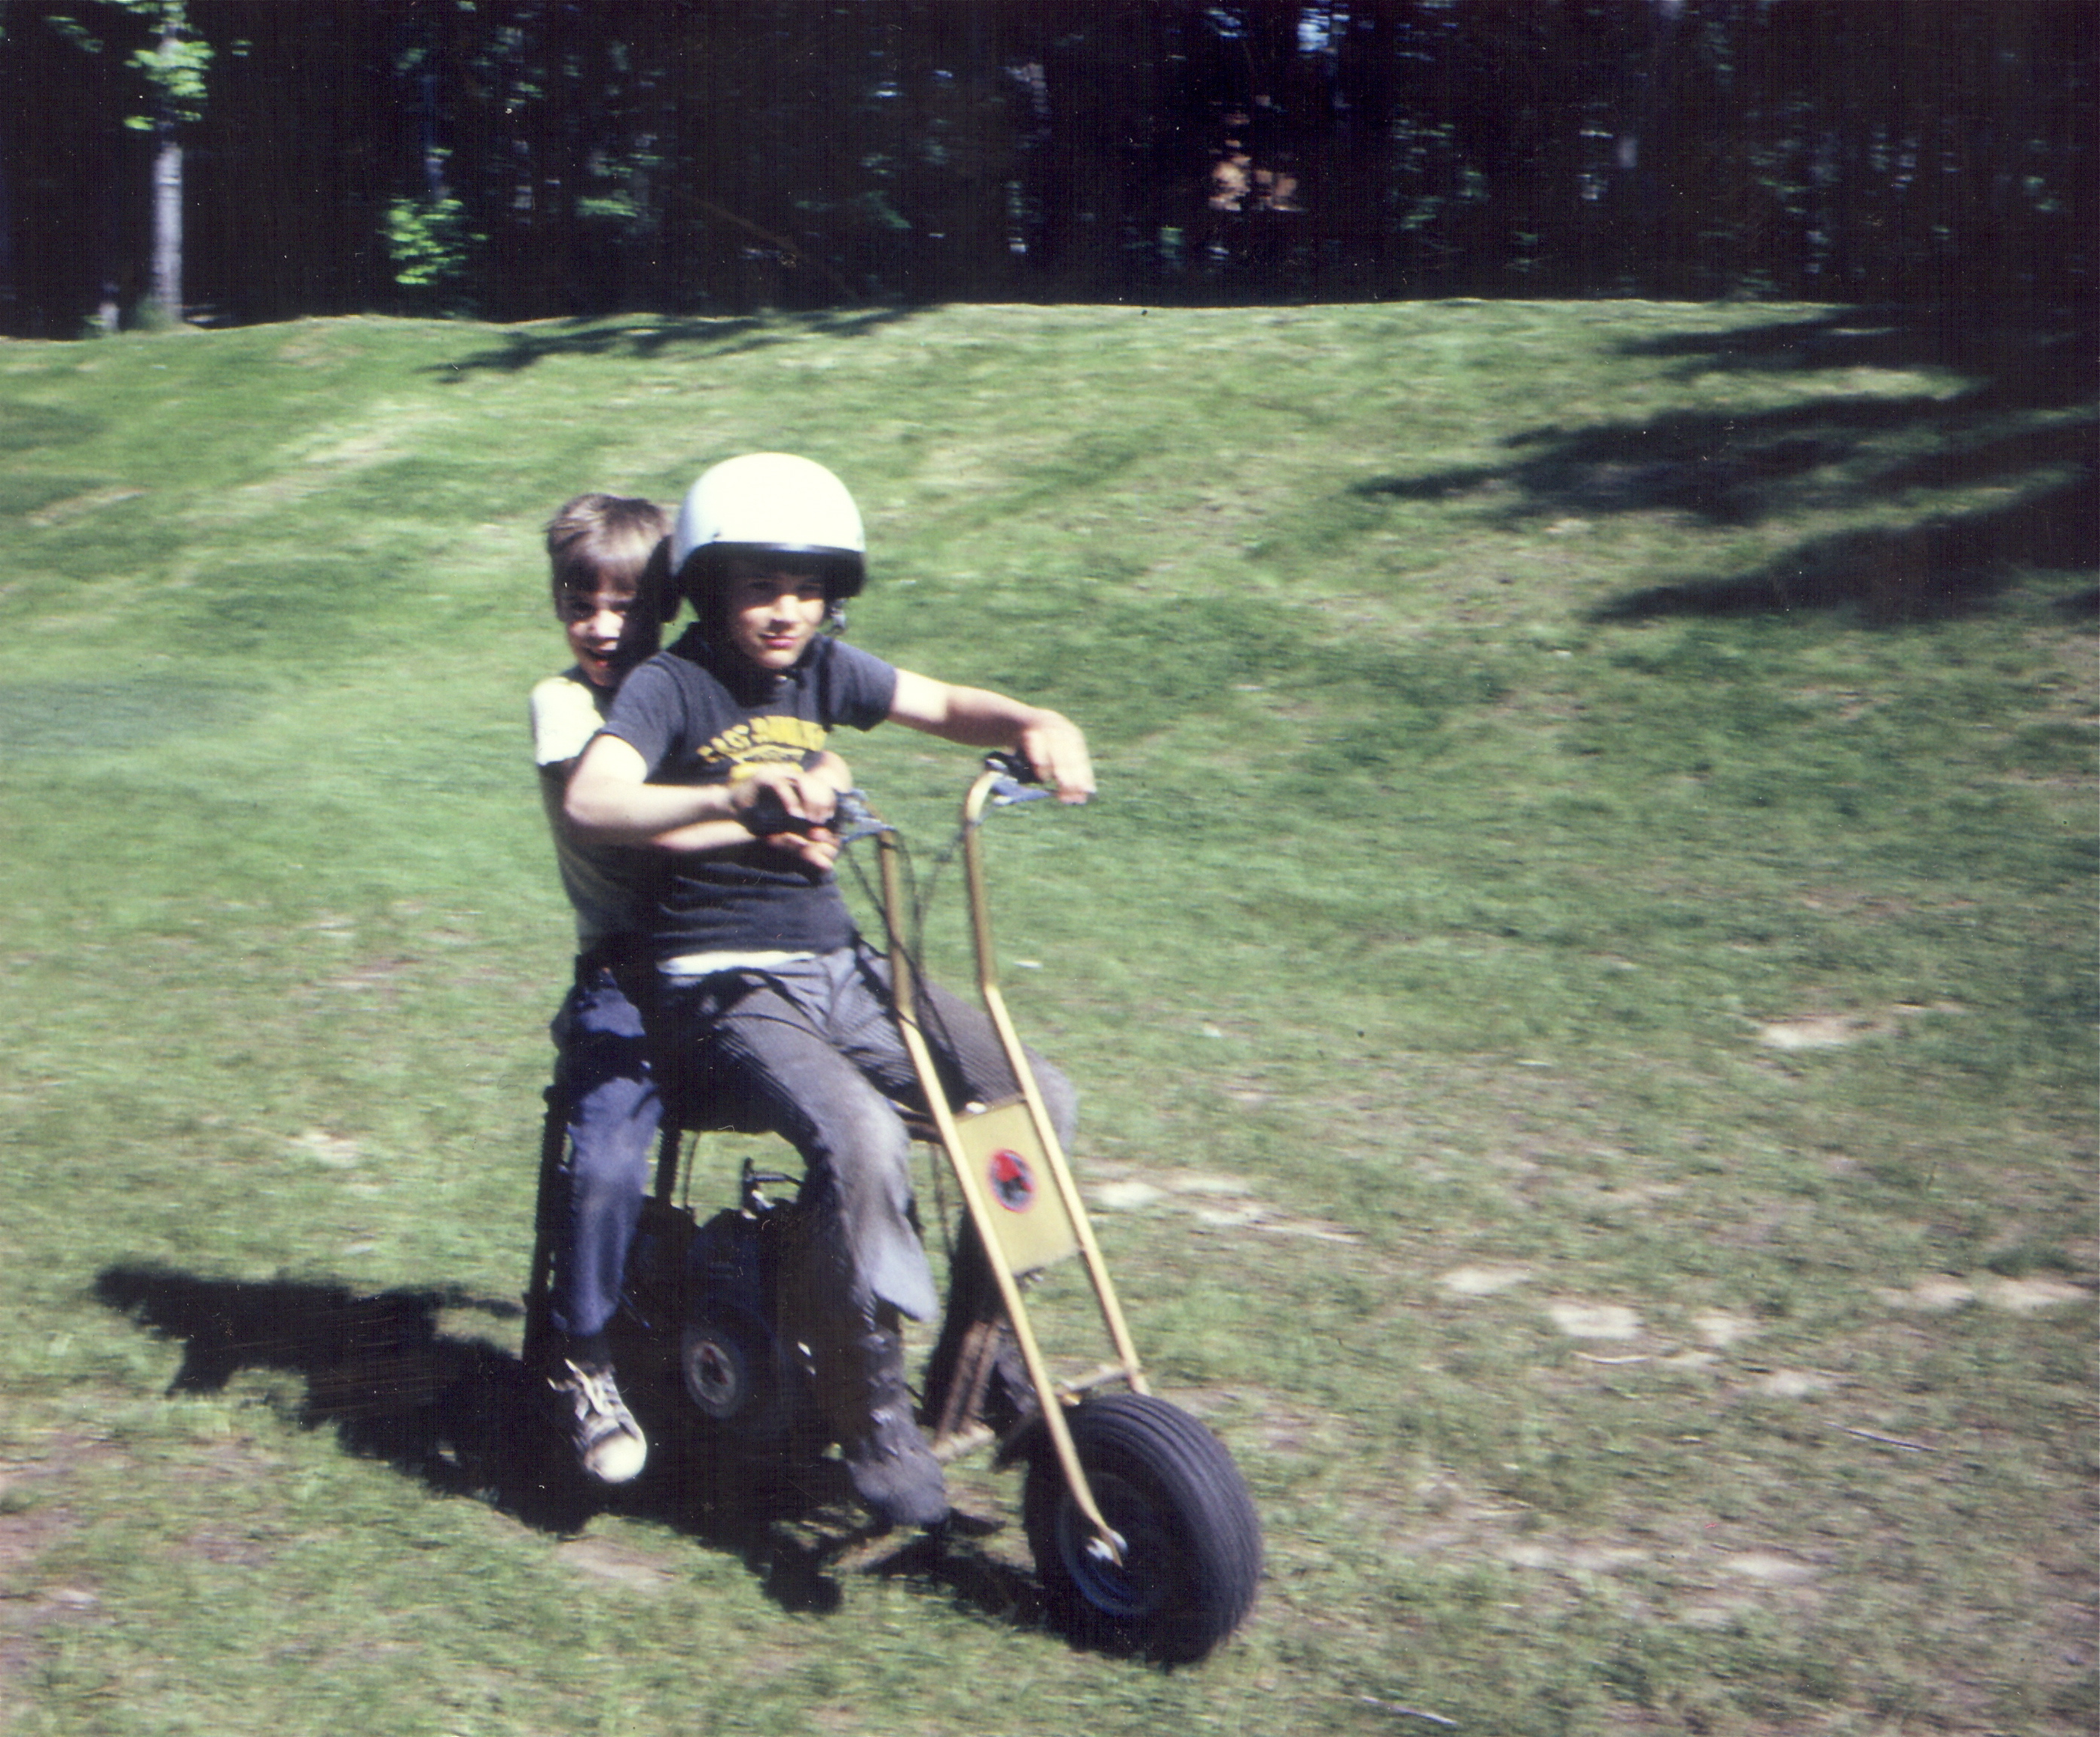 My brother John giving me my first ride on a minibike.